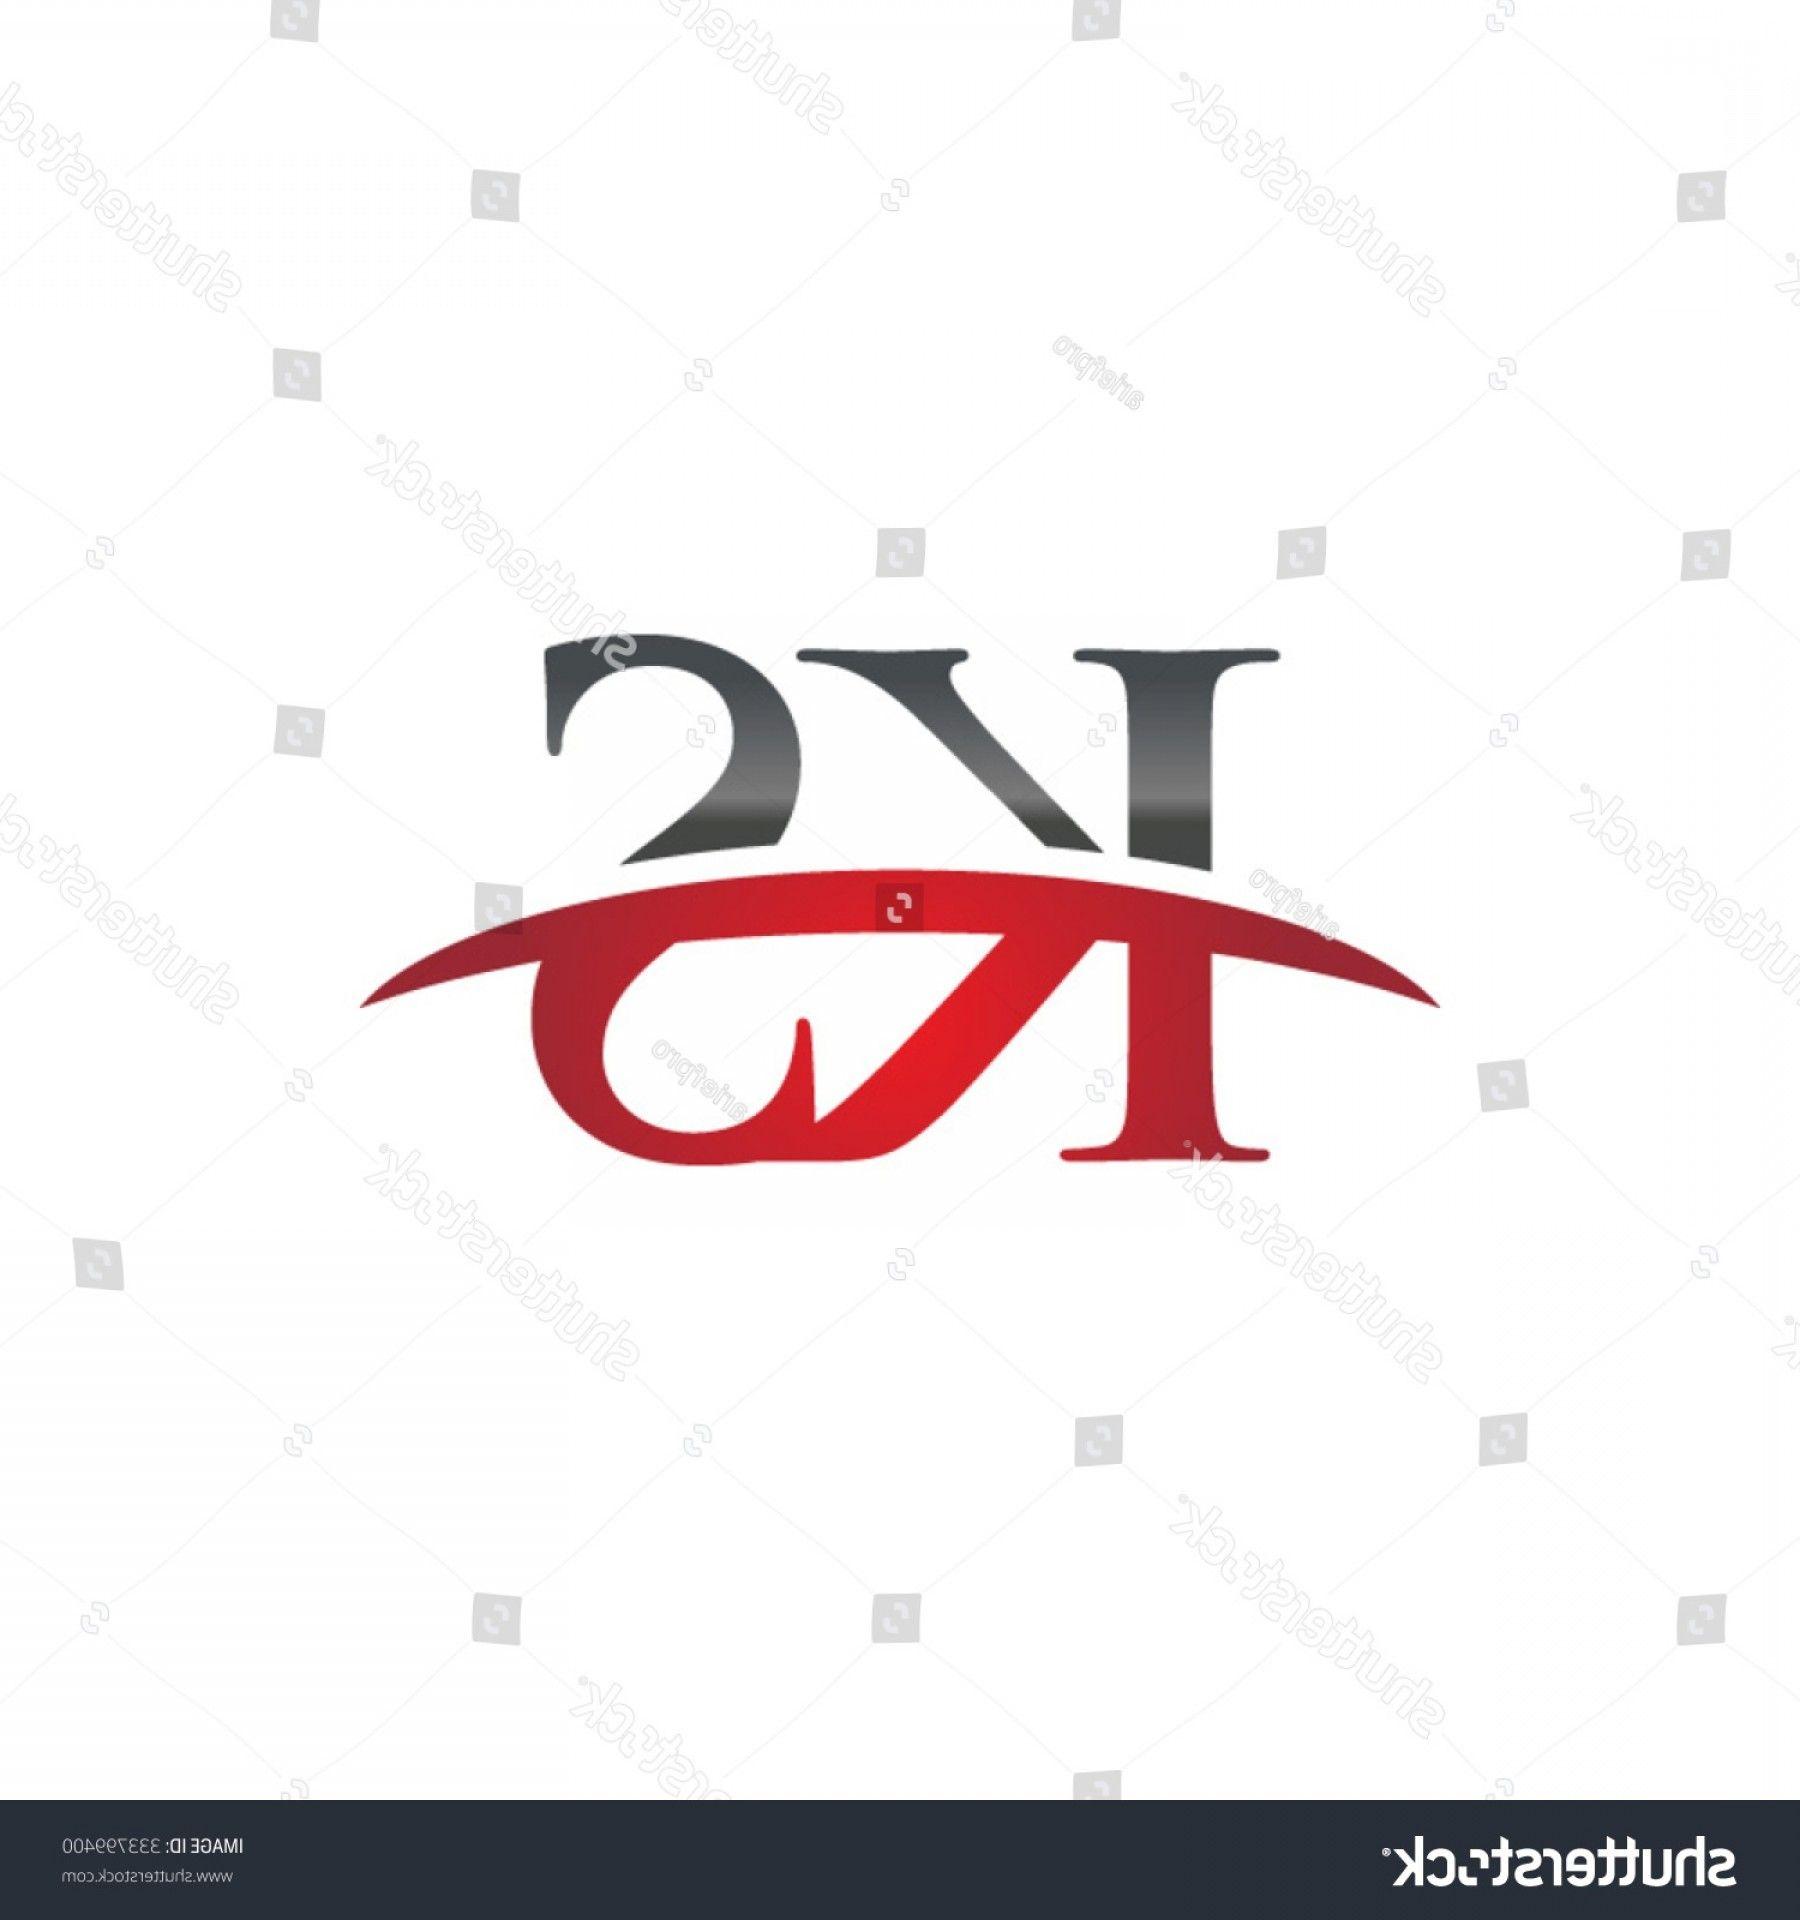 Red Swoosh Logo - Red S Company Logo Best Of Ks Initial Pany Red Swoosh Logo Stock ...